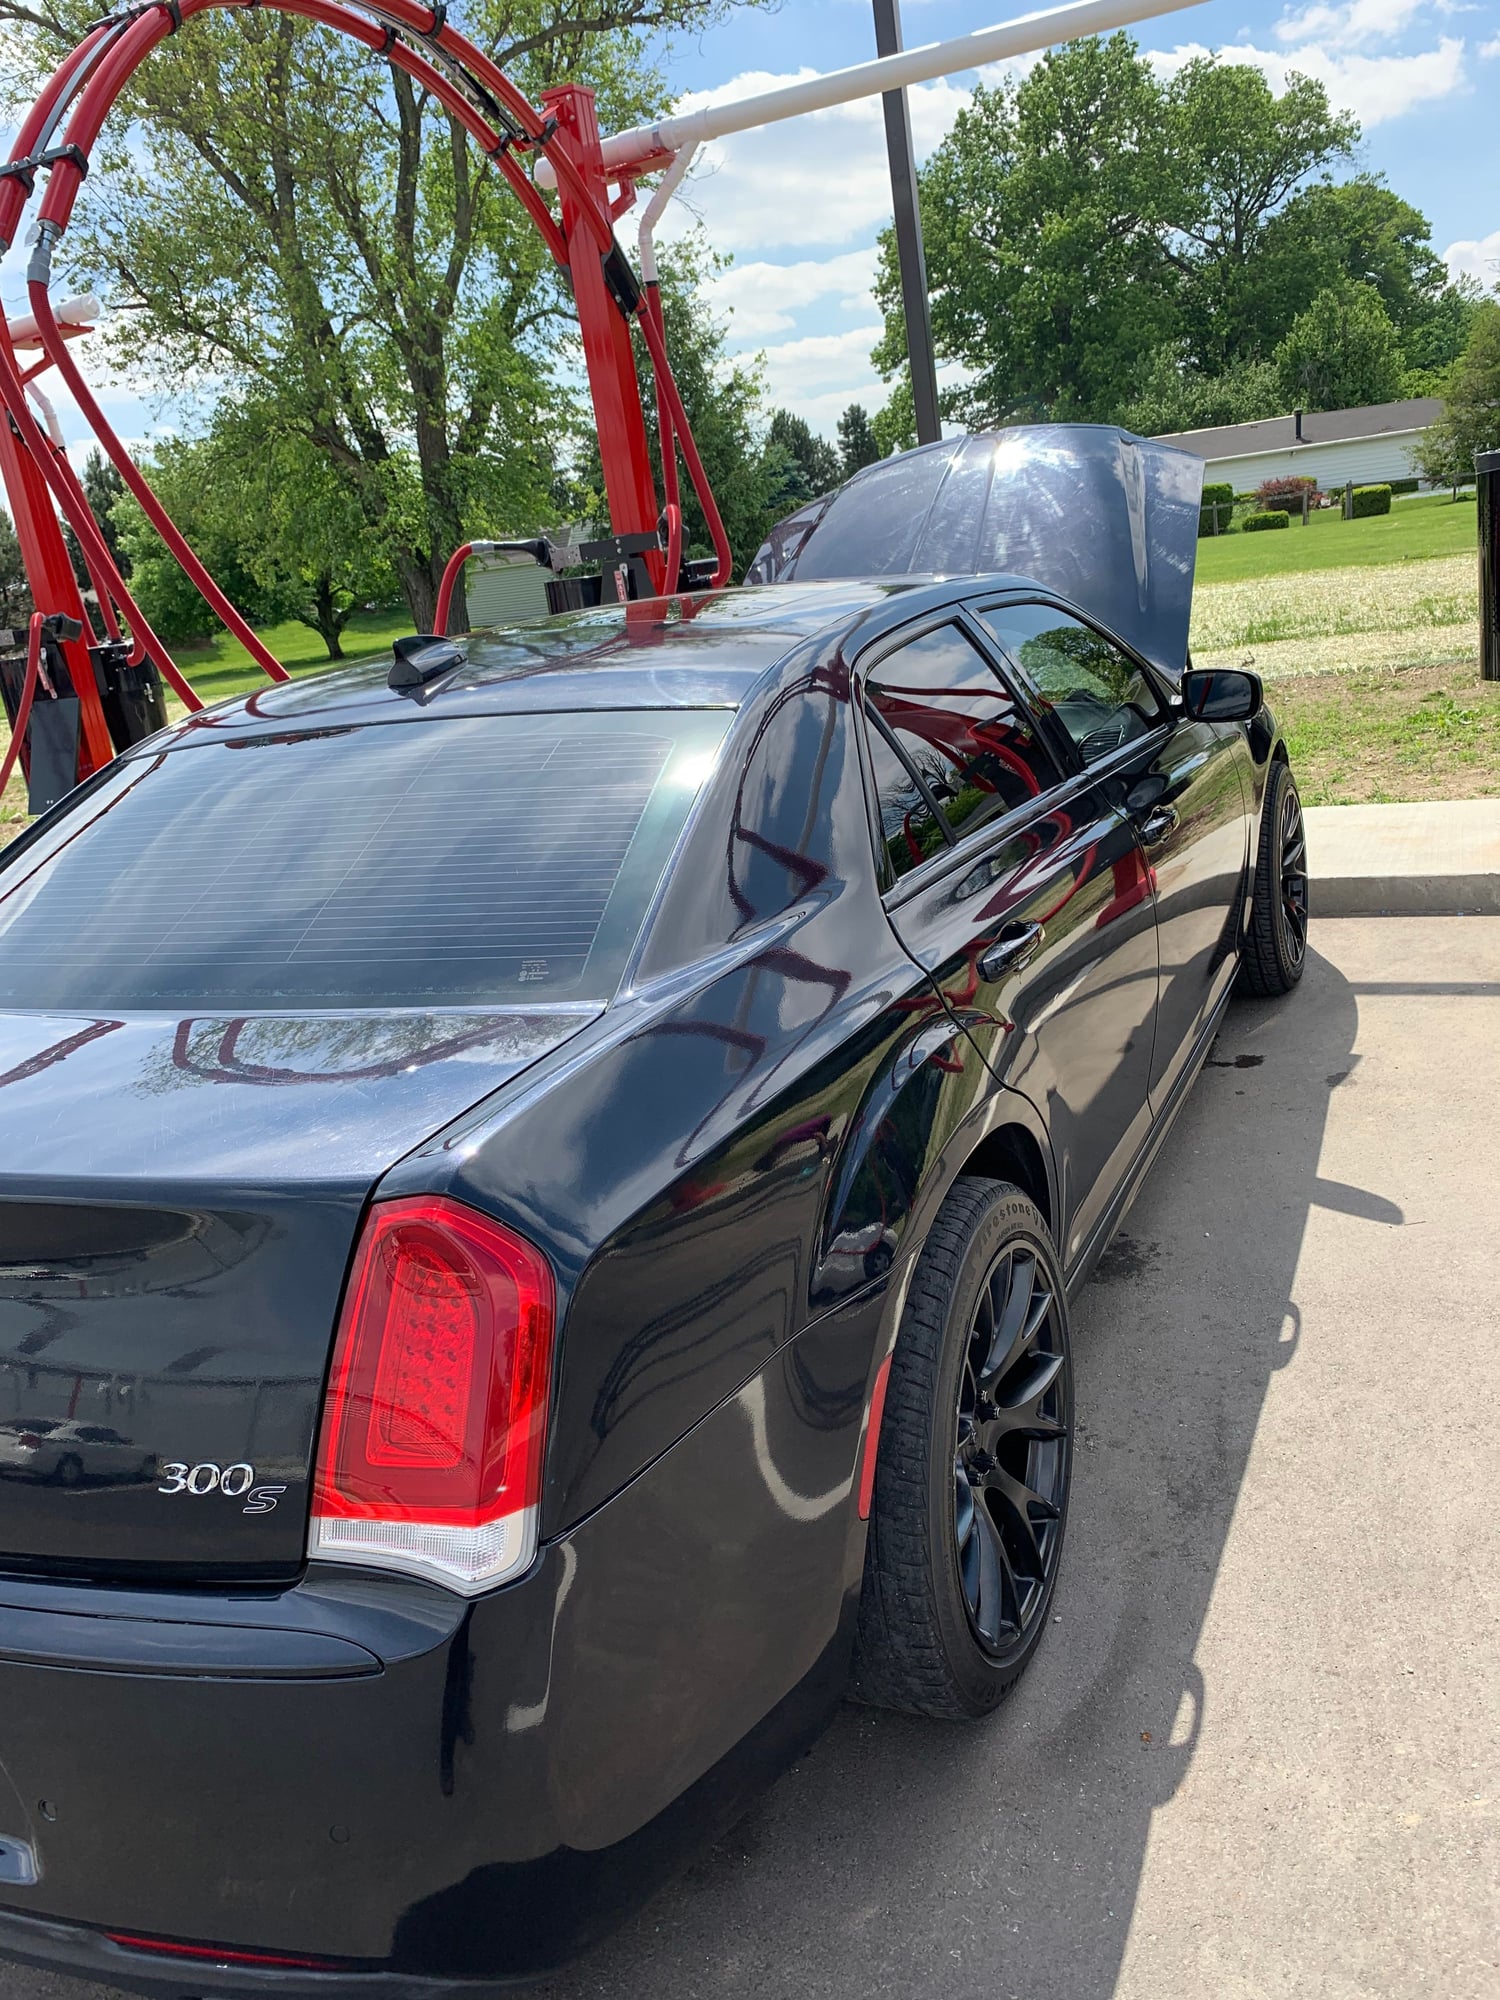 2018 Chrysler 300 - 2018 Chrysler 300S - Used - VIN 2c3ccagg1jh268828 - 45,000 Miles - 6 cyl - AWD - Automatic - Sedan - Black - Fort Wayne, IN 46808, United States